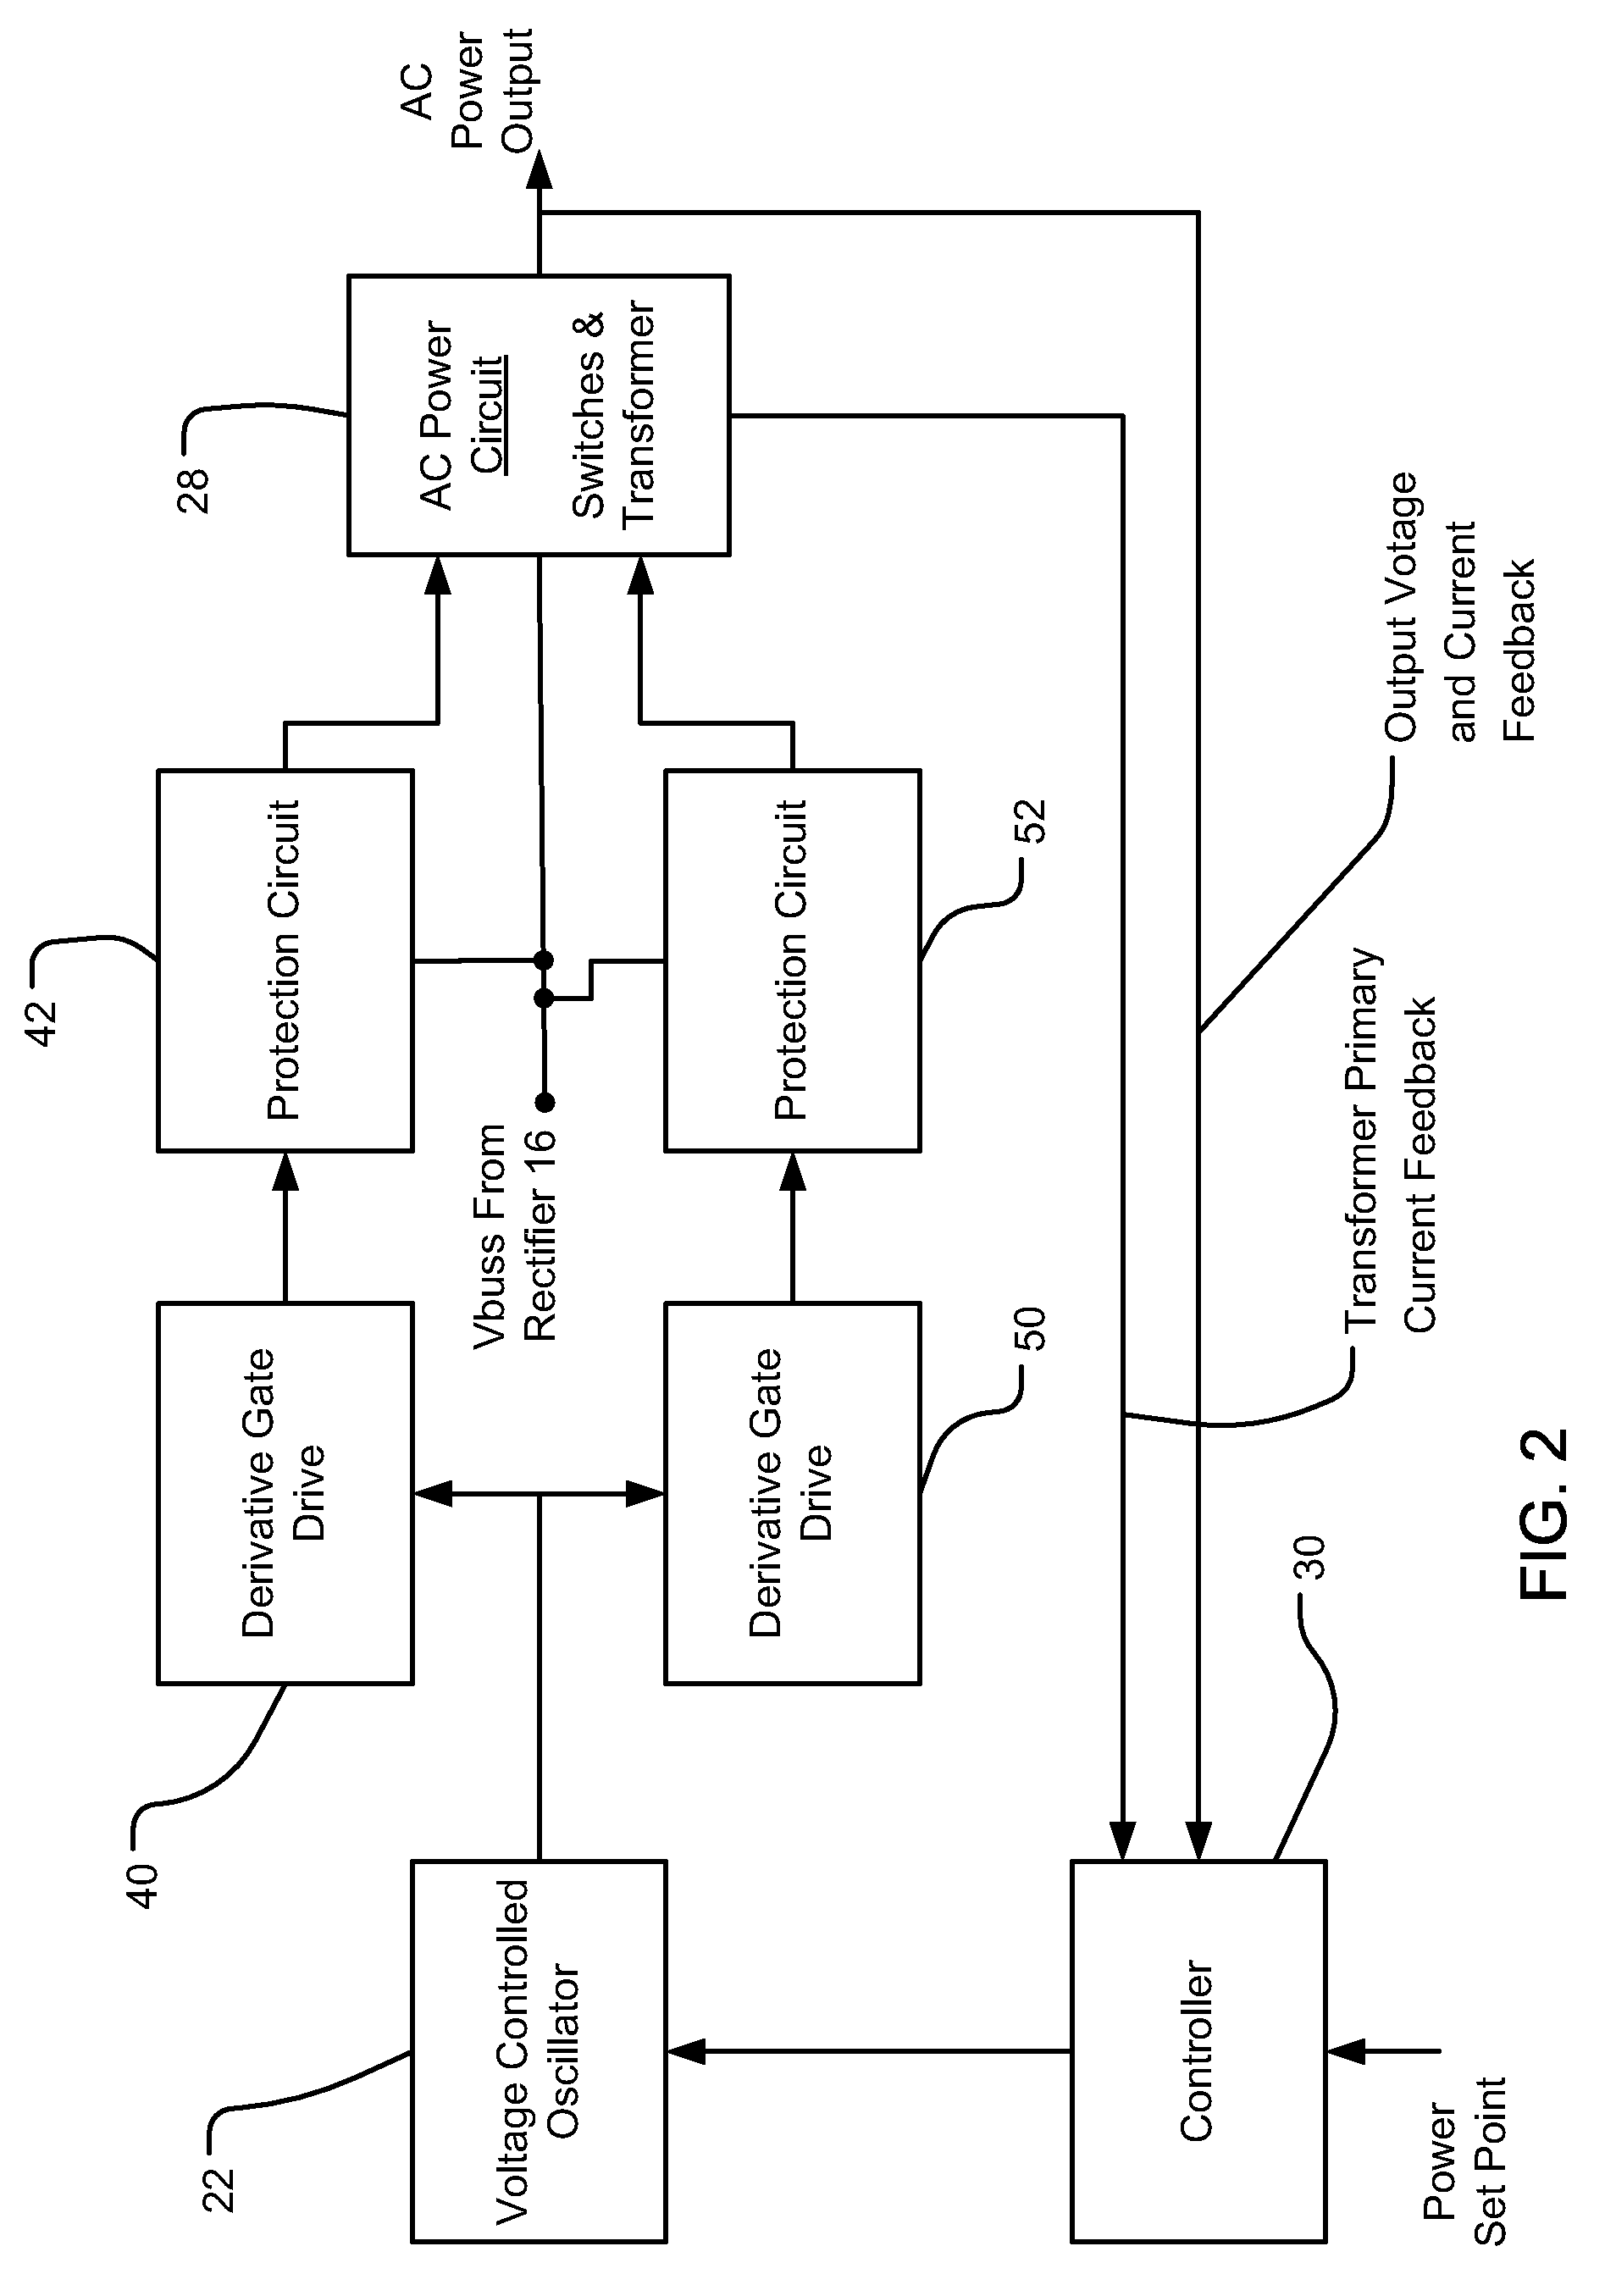 Protection method, system and apparatus for a power converter